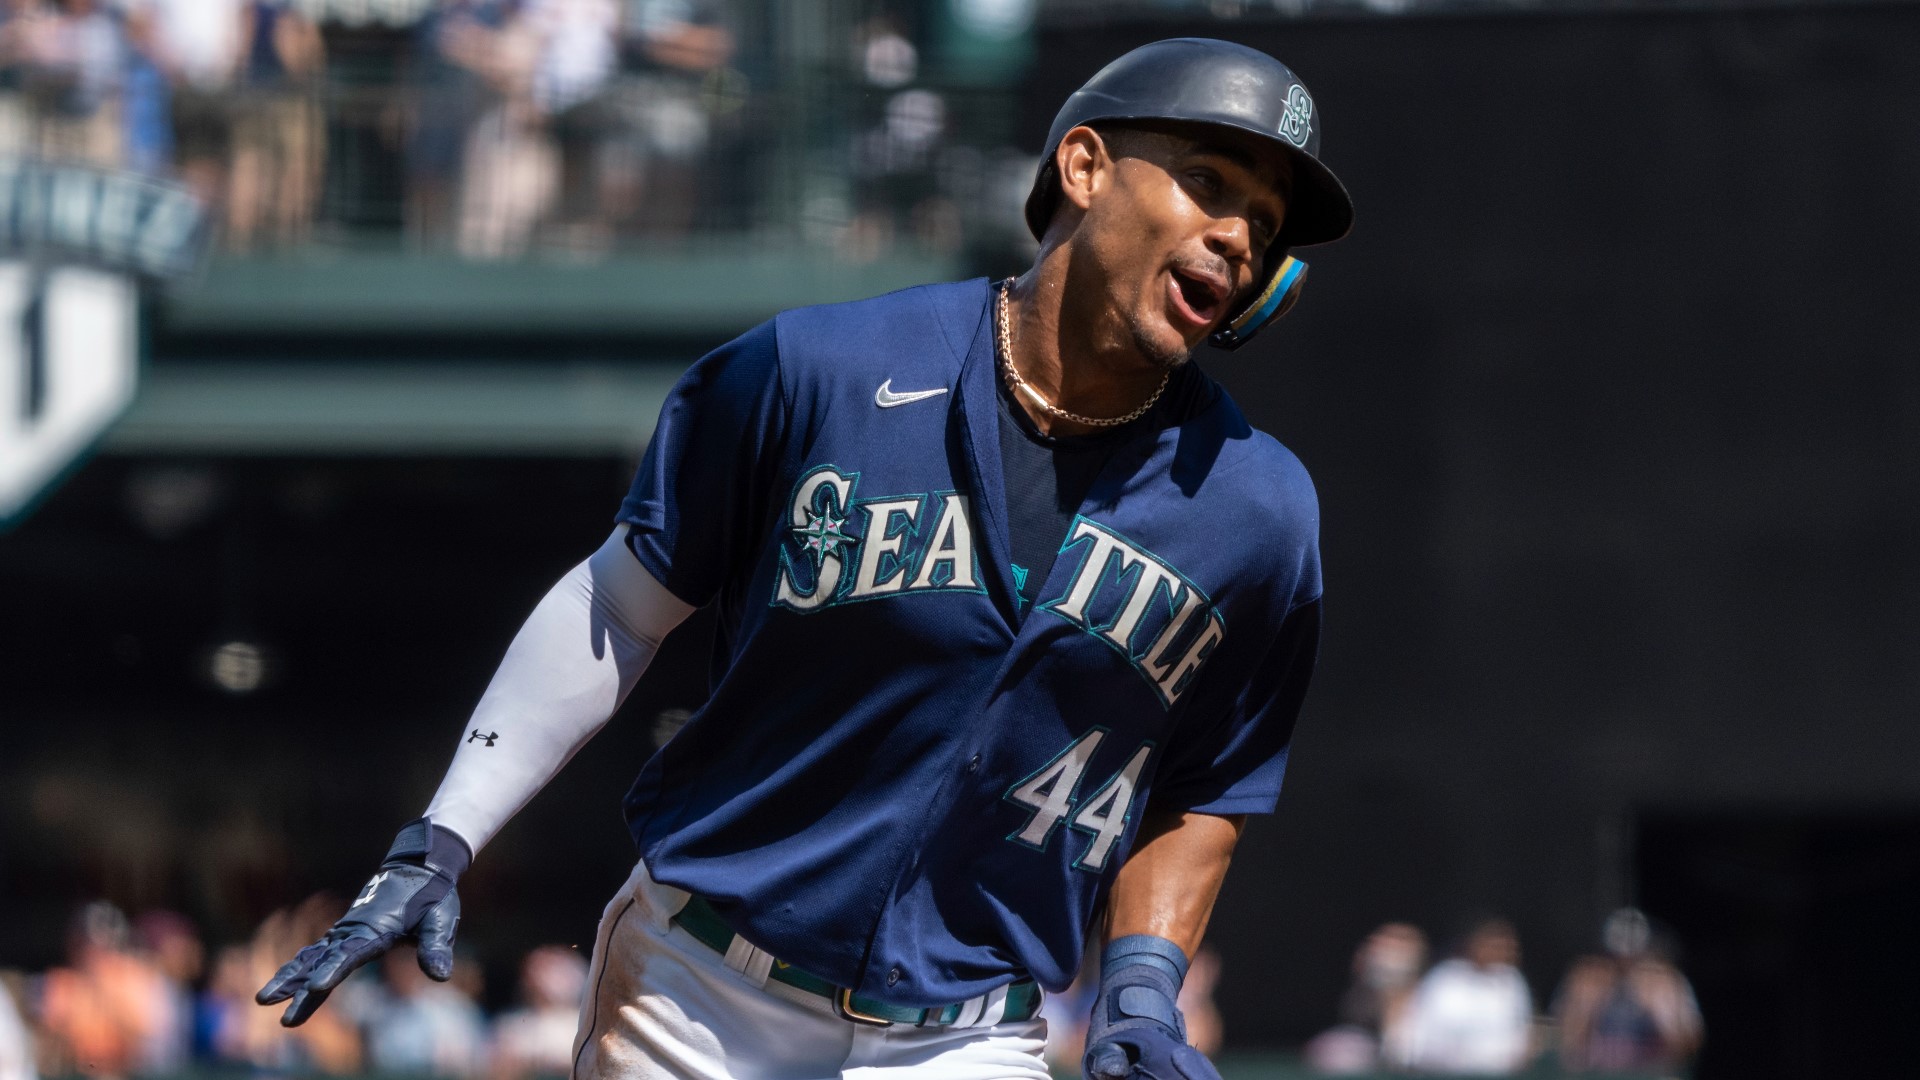 2022 MLB Home Run Derby Preview: How Julio Rodriguez stacks up